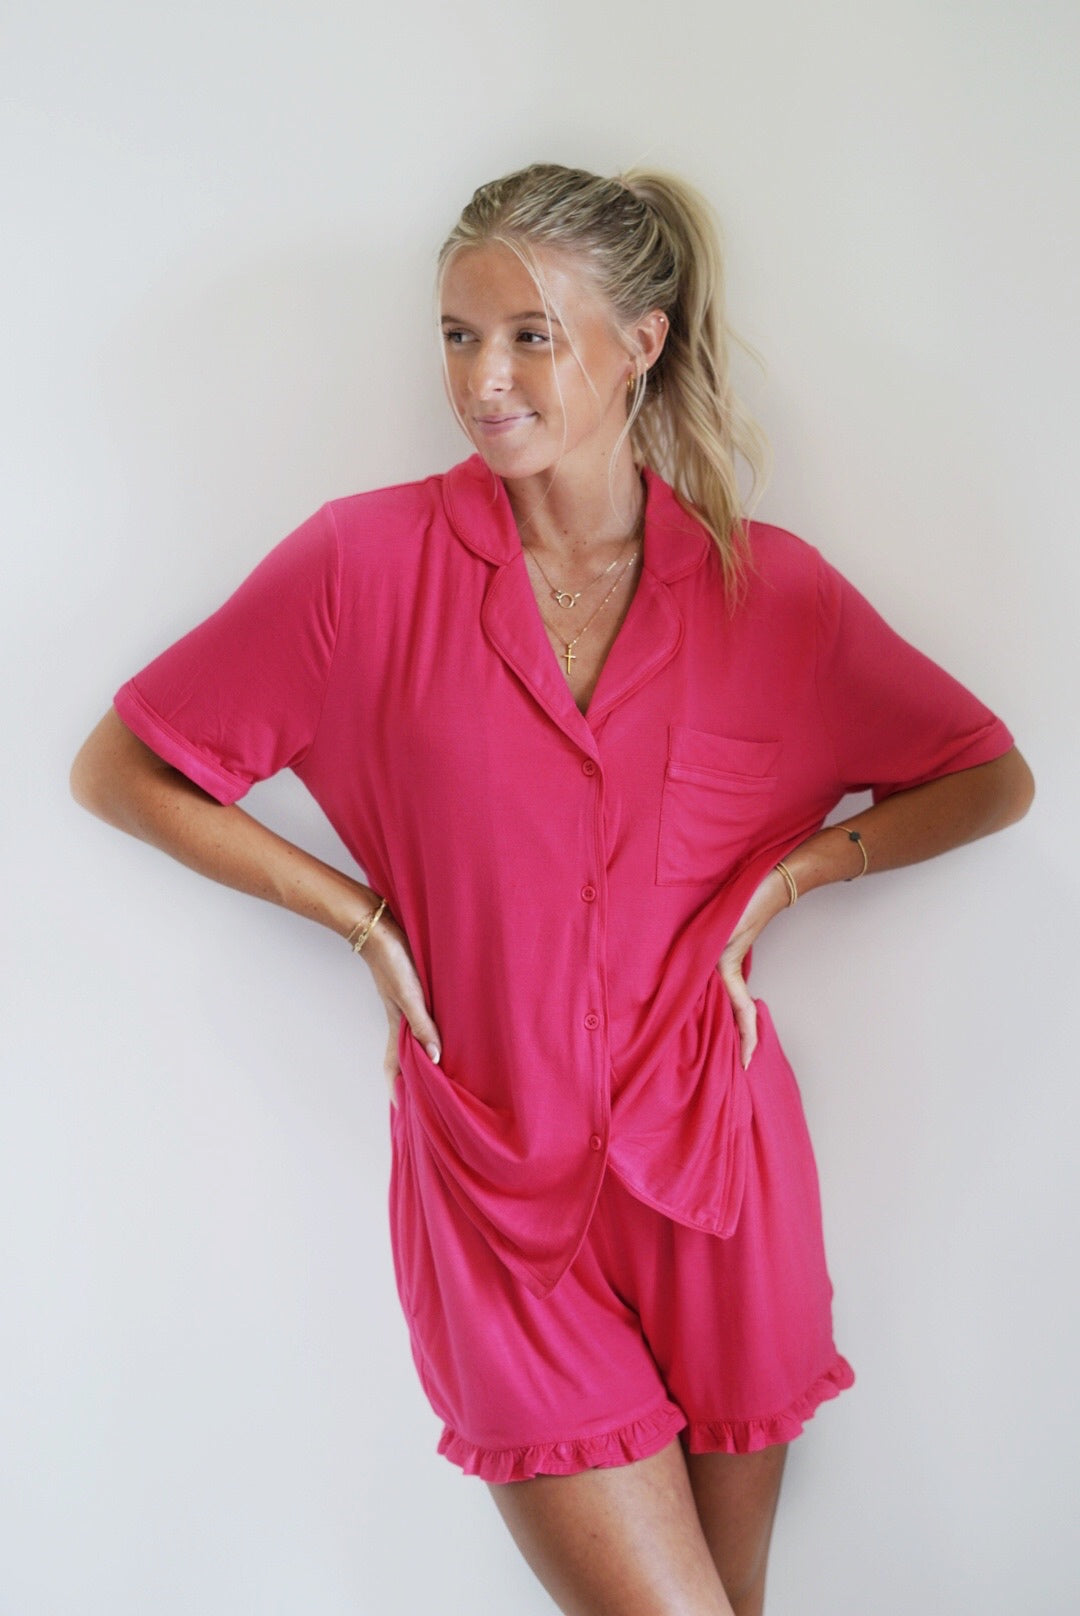 Serena Hot Pink Sleep Set Collared Neckline Button Down Top Elastic Waistband Shorts 95% Polyester, 5% Spandex Care: Hand Wash Cold, Hang Dry Model is wearing a size small